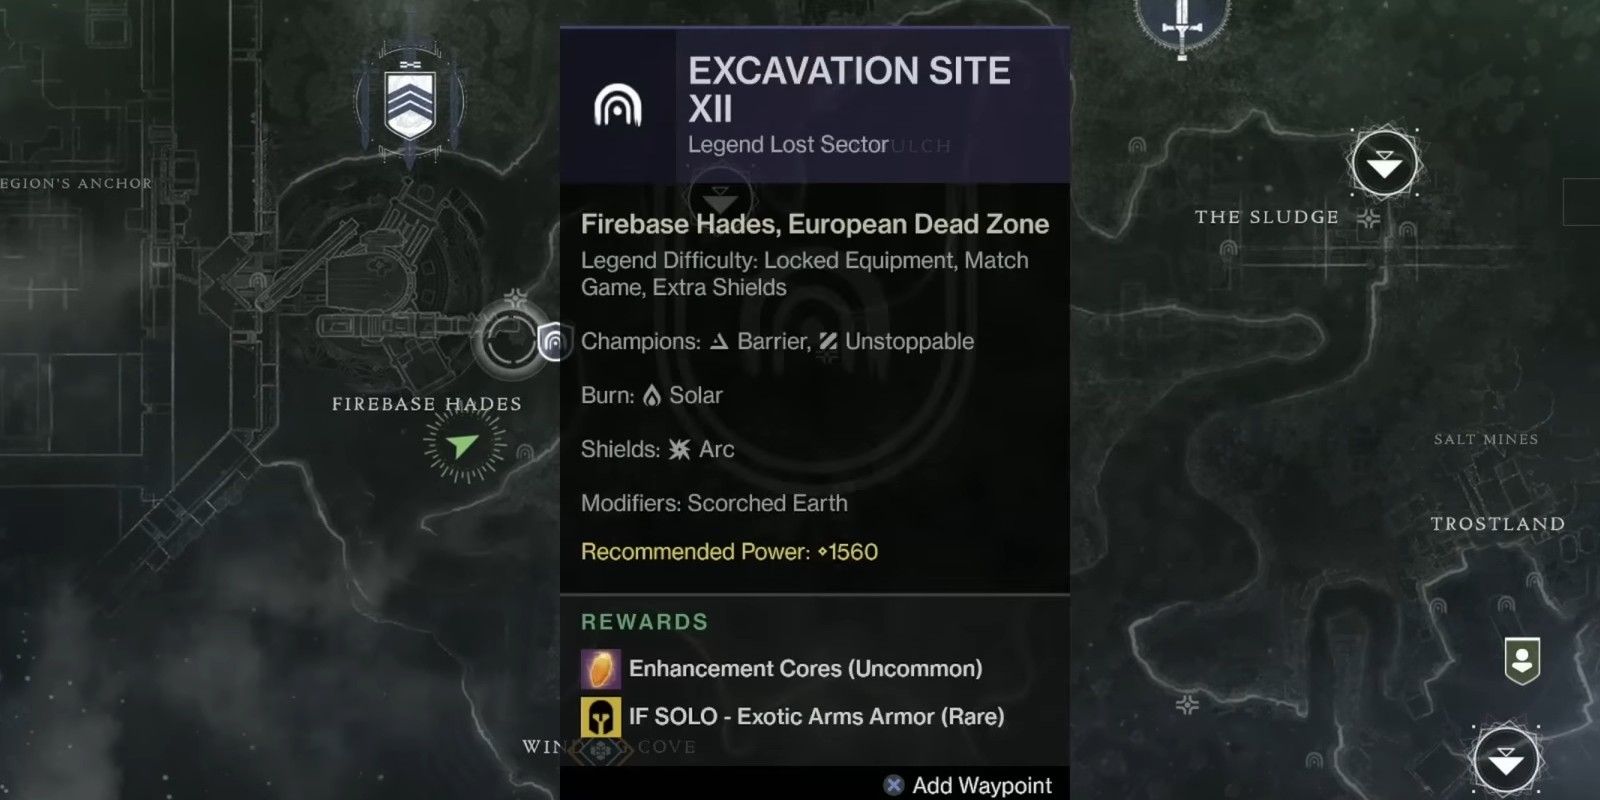 Destiny 2 Excavation Site XII Lost Sector Legend Master Guide